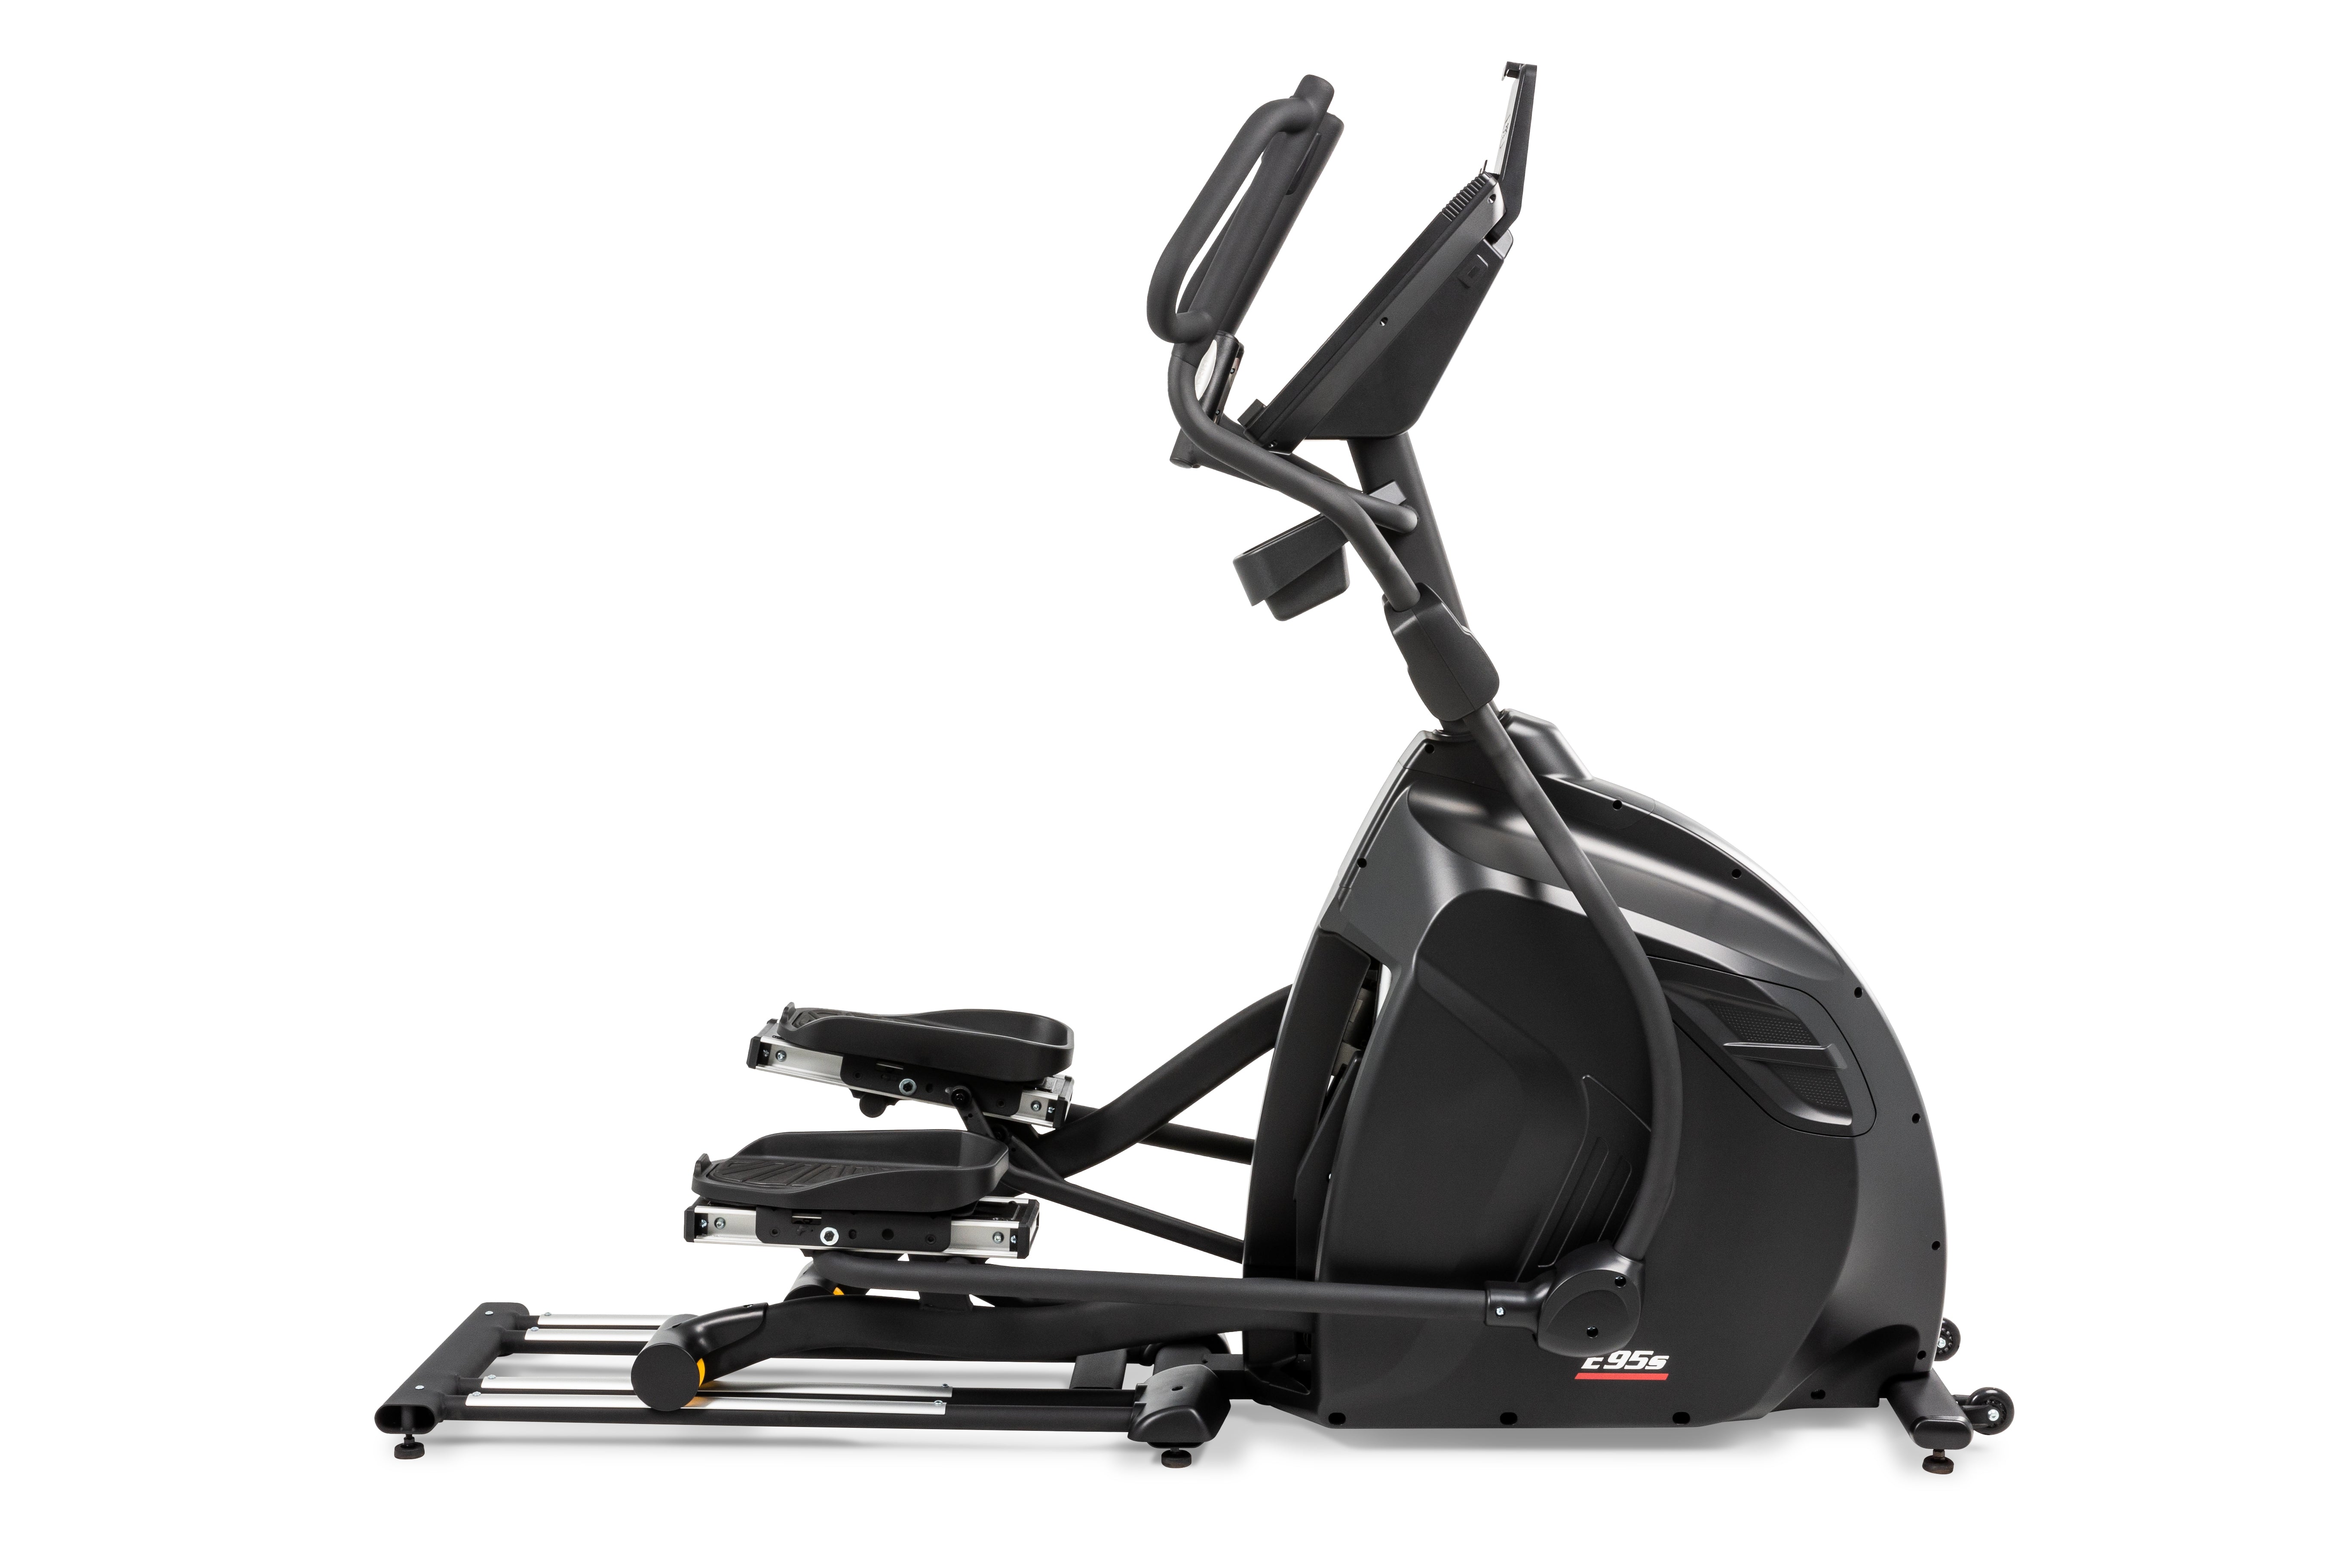 Side profile of the Sole E95S elliptical machine showcasing its sleek black design, adjustable foot pedals, curved handlebars, a prominent digital display panel, and a sturdy base with a yellow folding release lever and wheels for mobility.